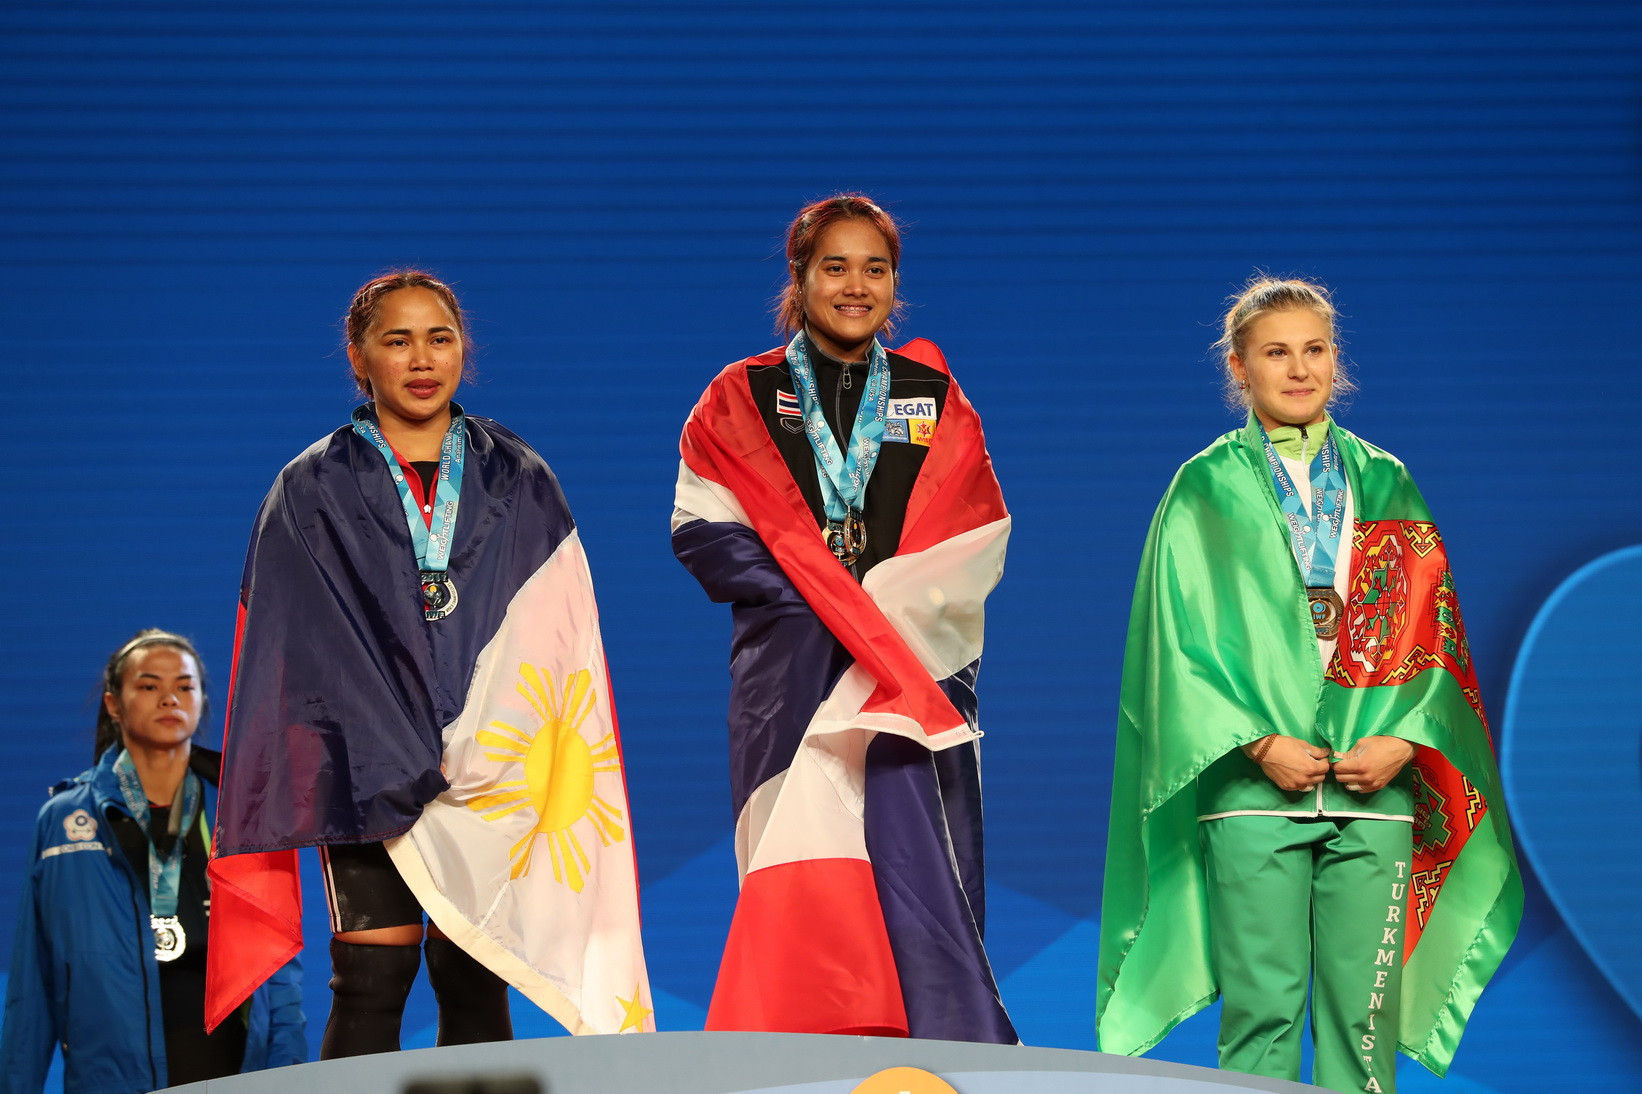 Thailand’s Sopita Tanasan claimed a clean sweep of gold medals at the 2017 IWF World Championships ©IWF